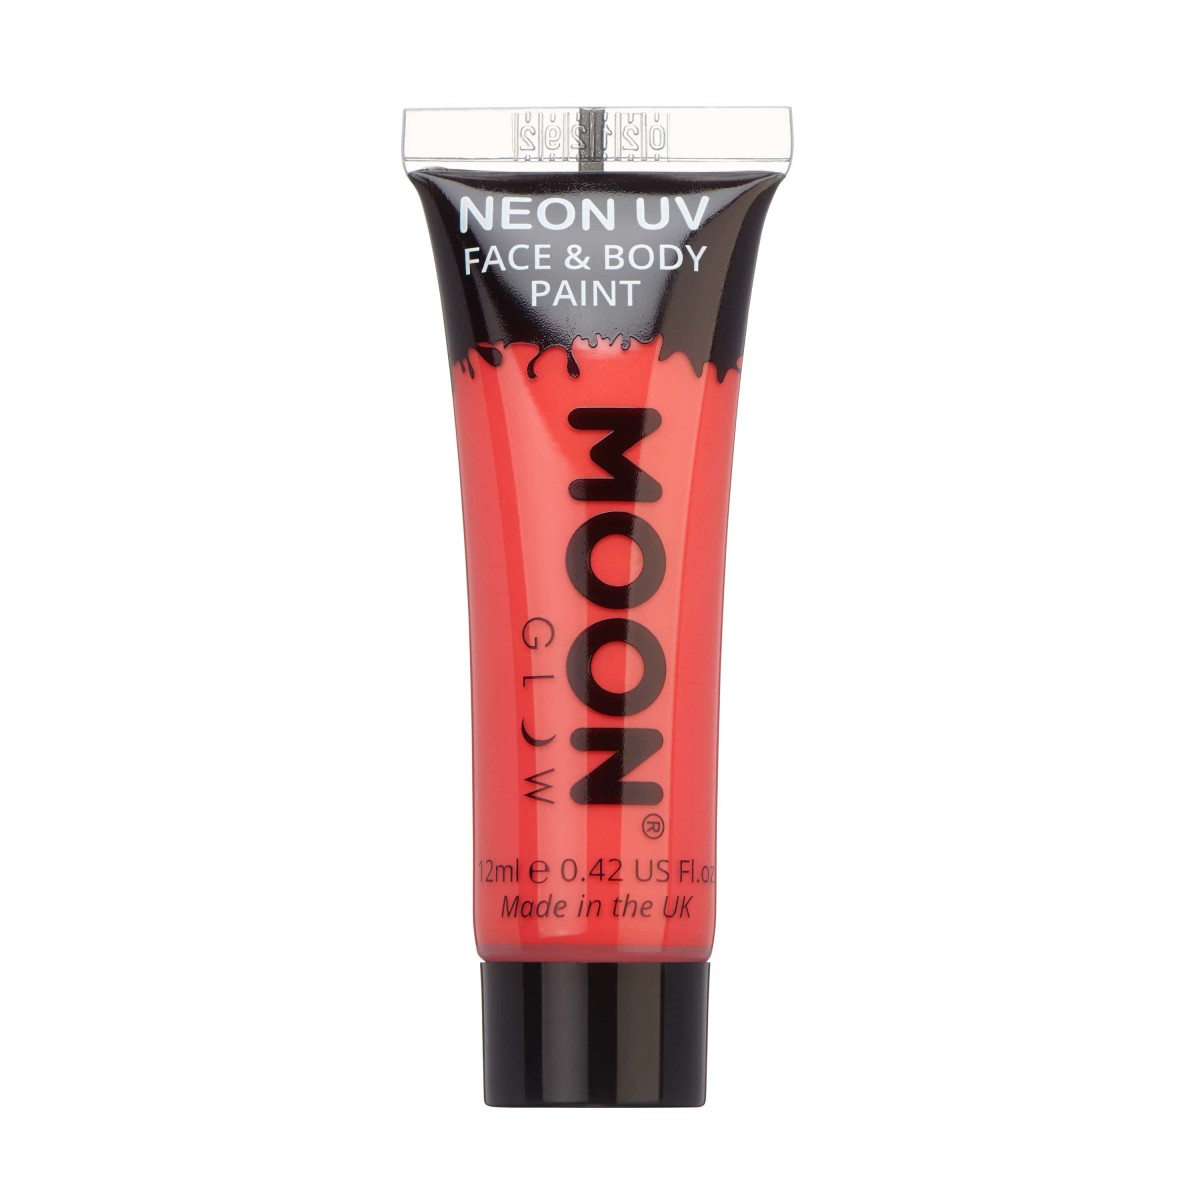 MOON CREATIONS M3 INTENSE NEON UV FACE & BODY PAINT RED 12ml